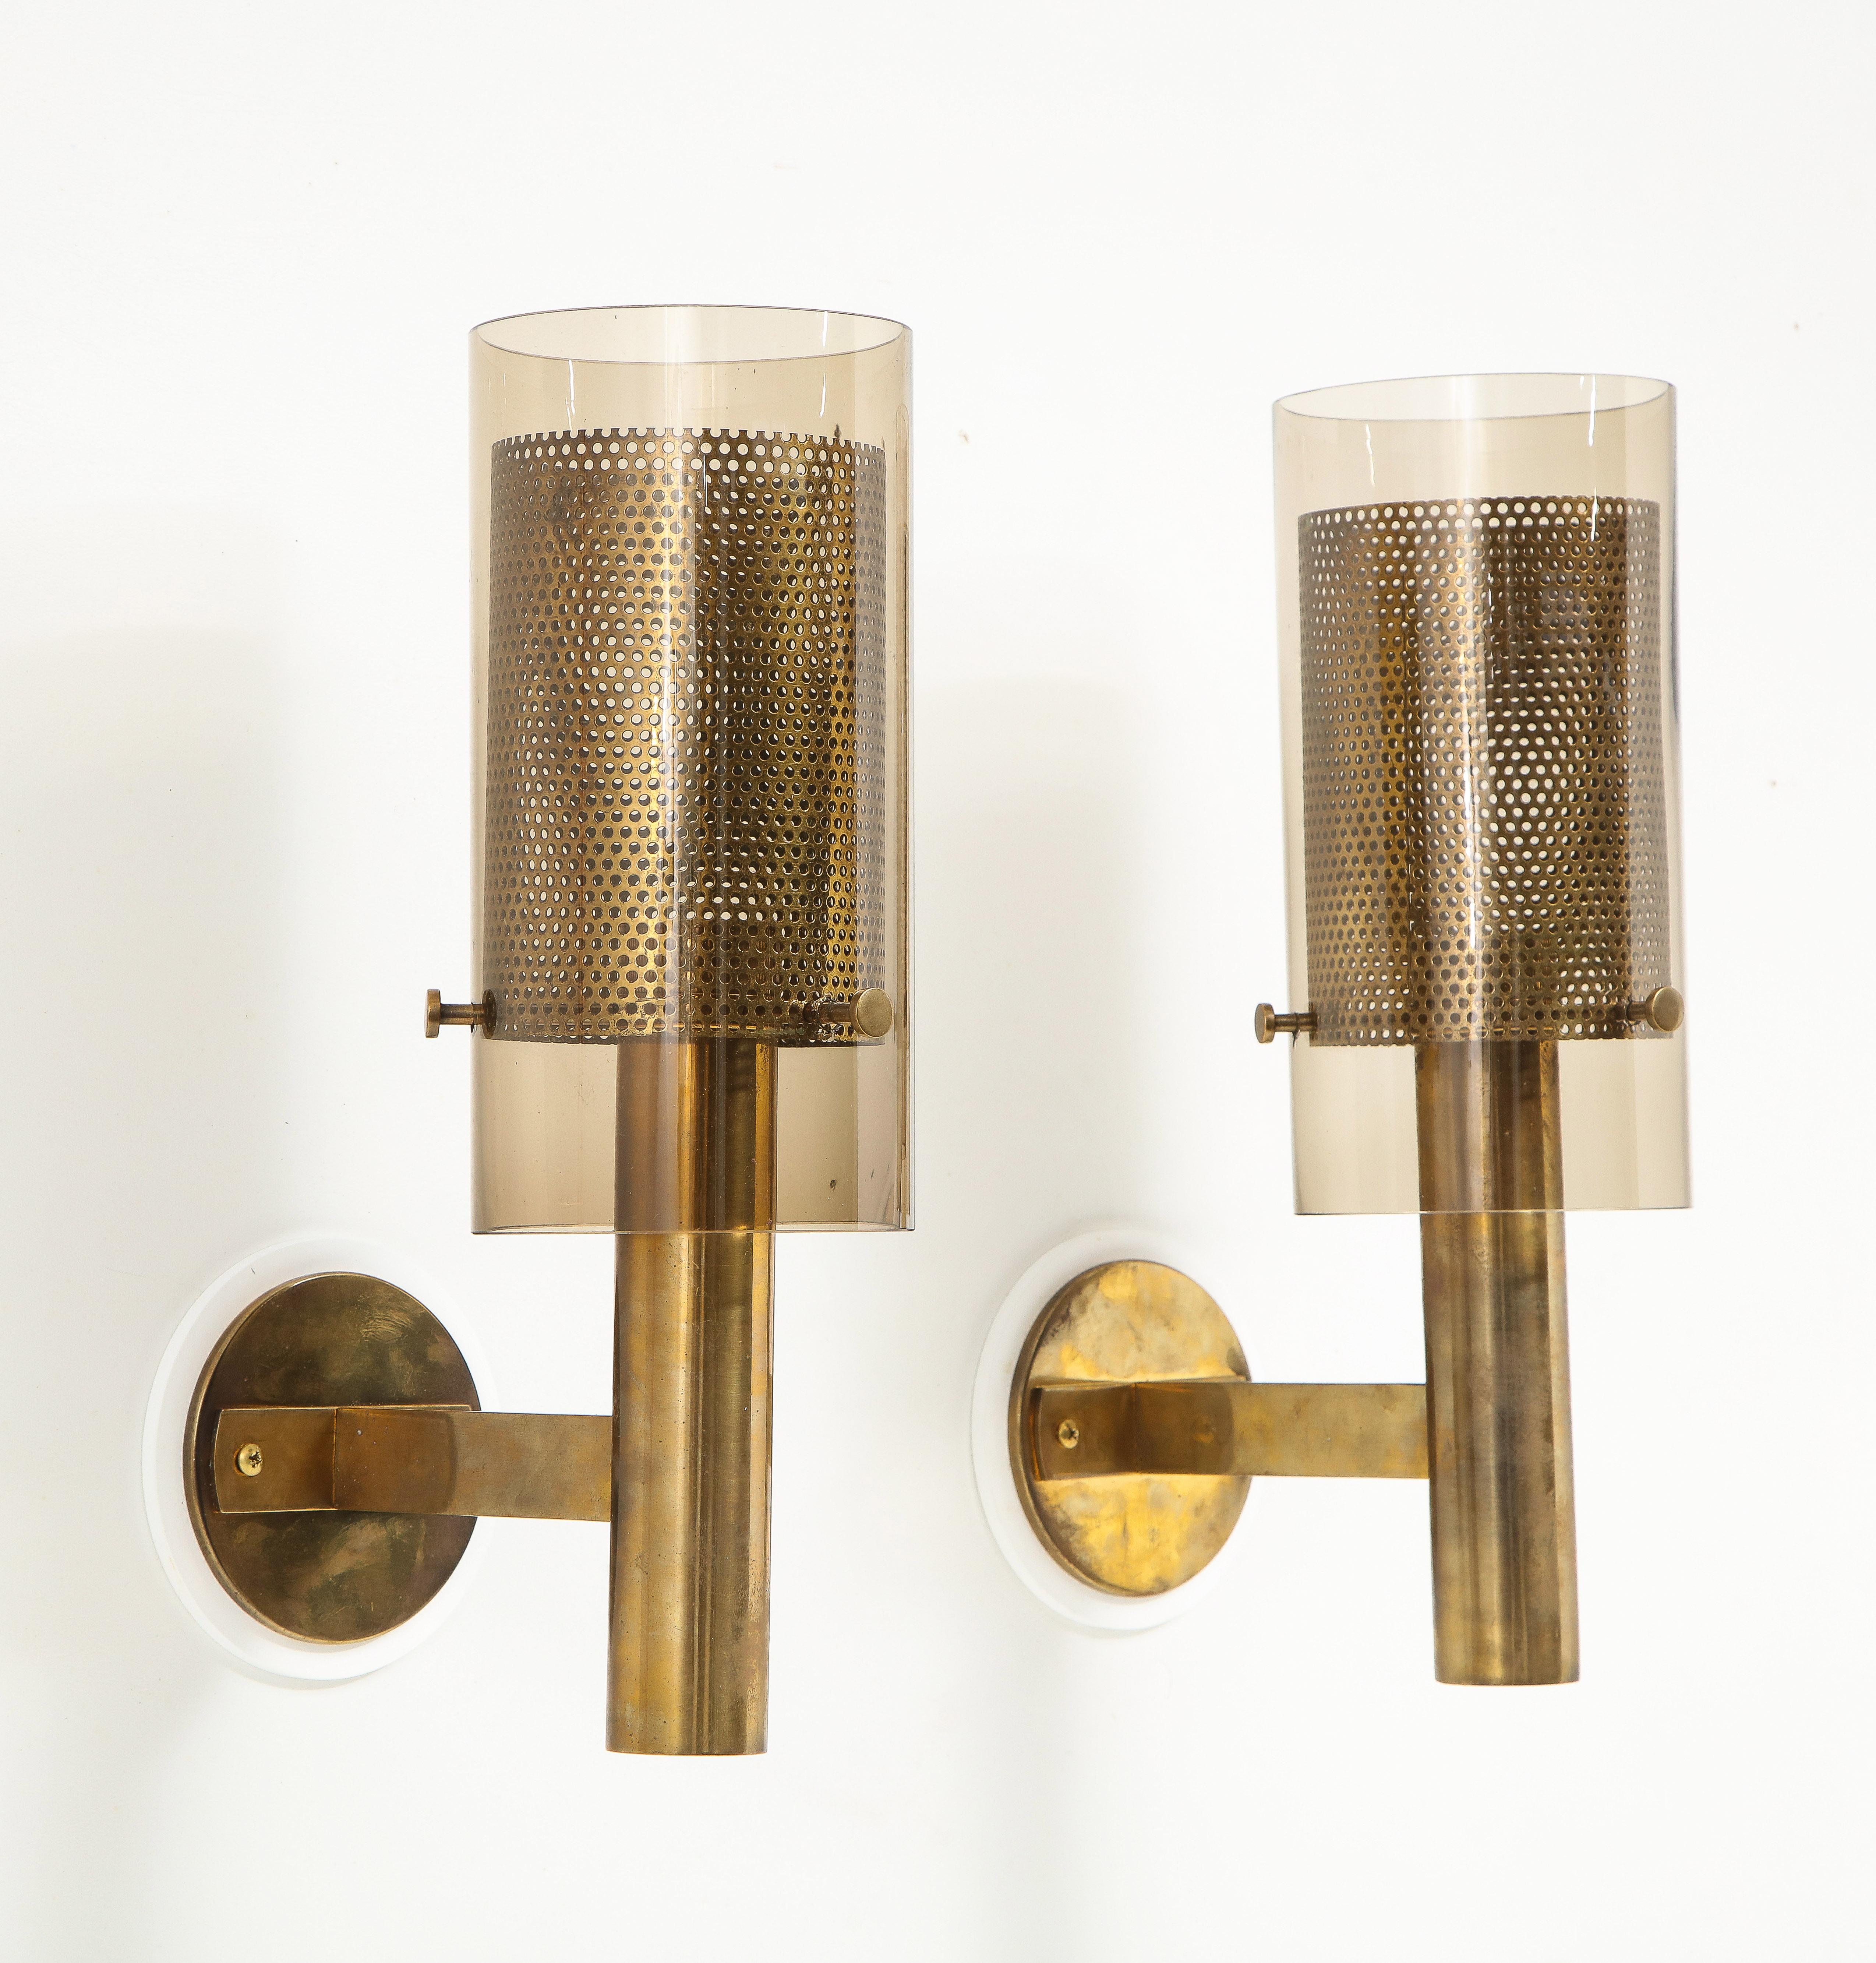 Elegant pair of single light sconces by Hans-Agne Jakobsson for Marakaryd of Sweden. The shades consist of a pierced brass sleeve within an amber glass shade held by three large machined screws.